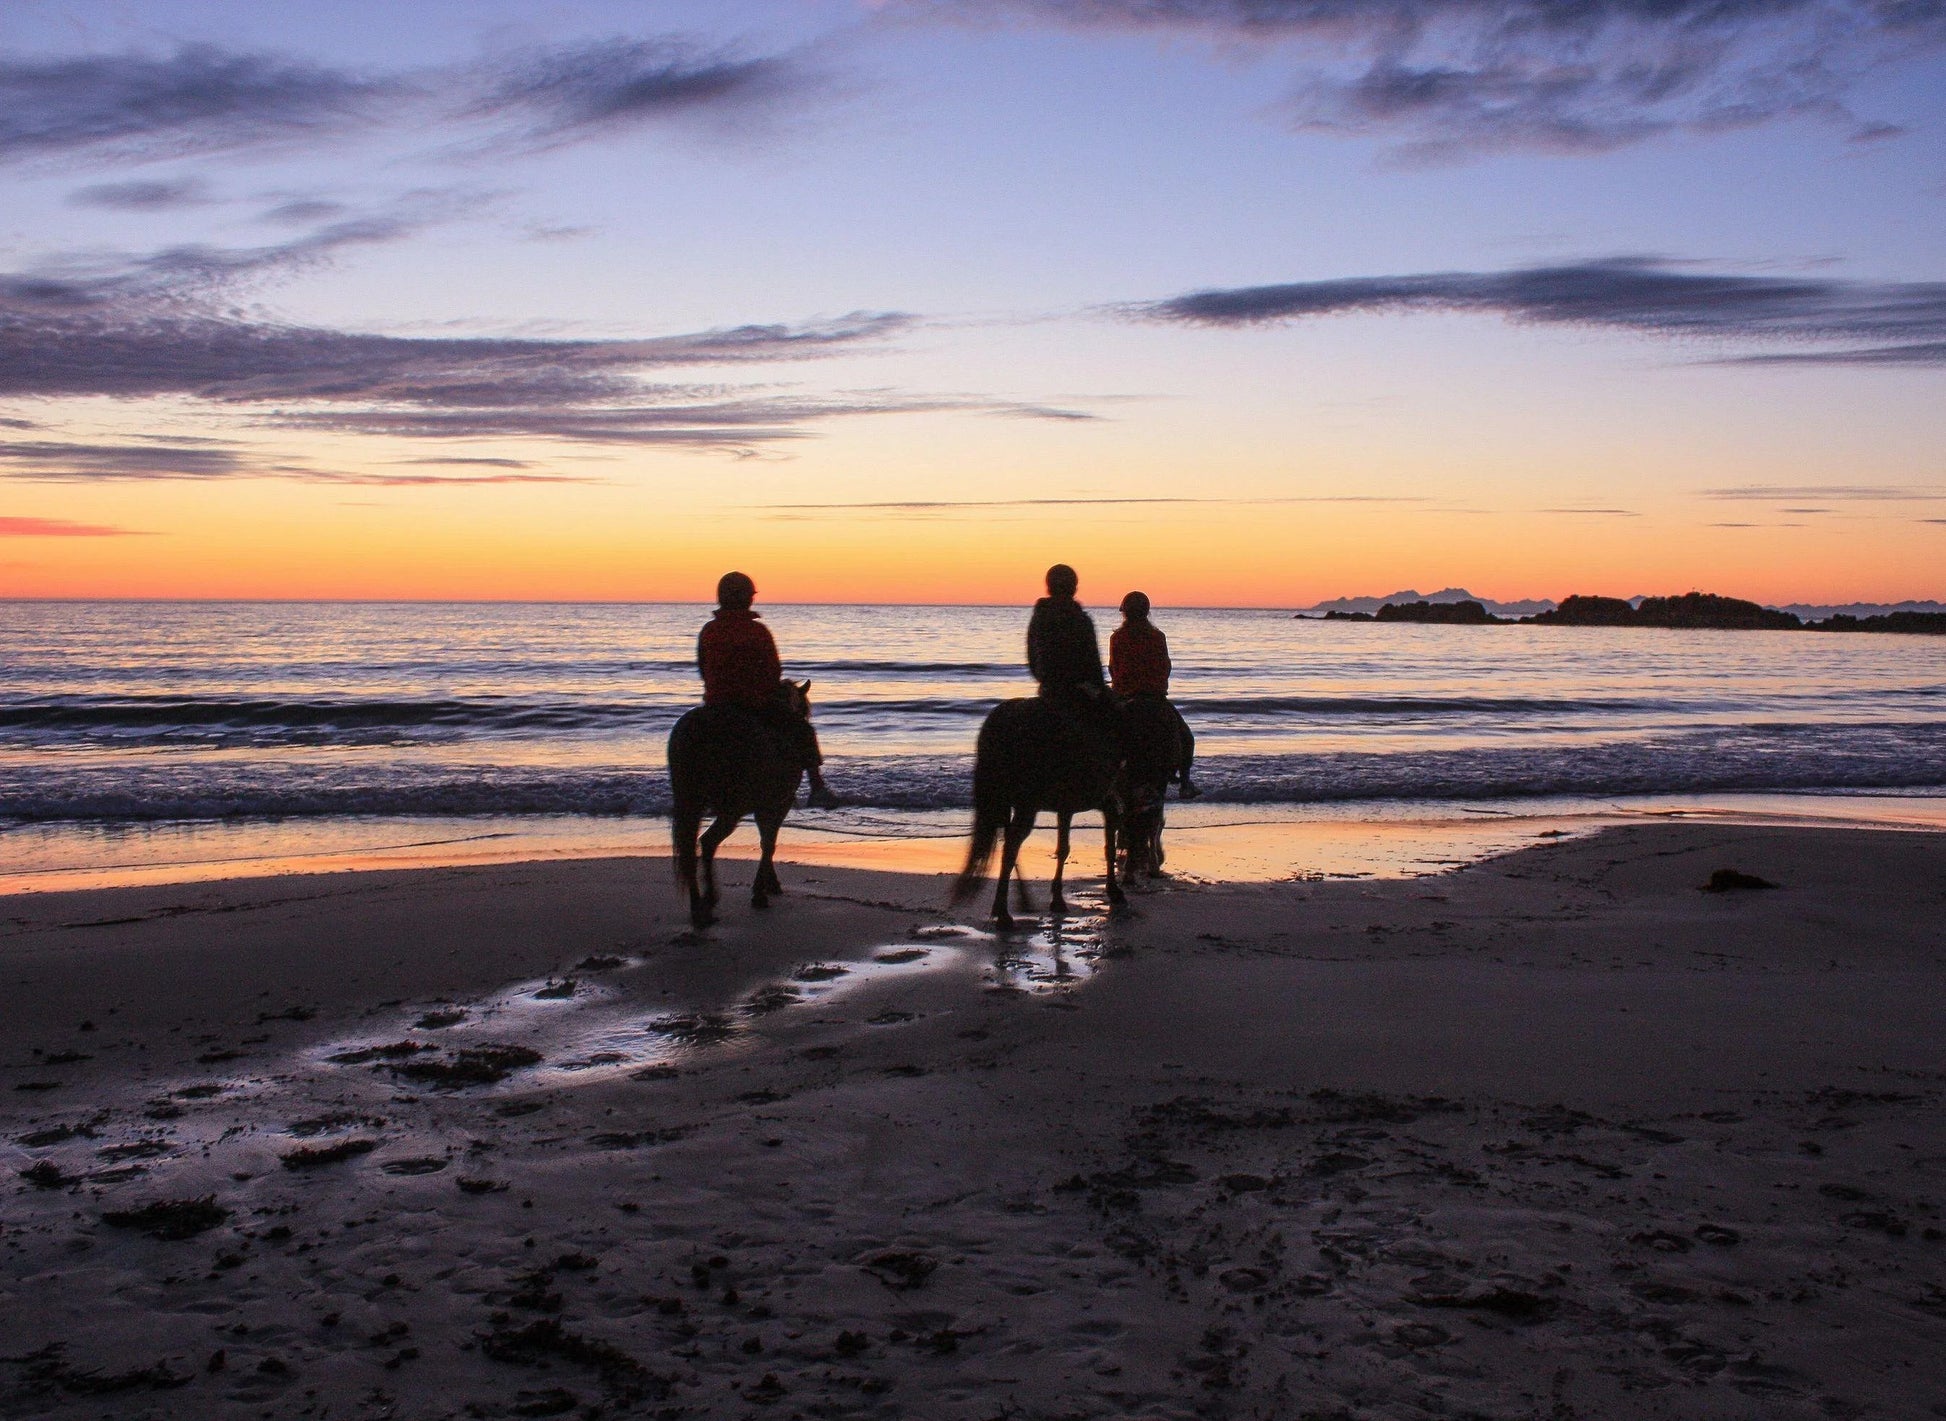 Three people horseback riding on the beach during the sunset in Lofoten Norway.